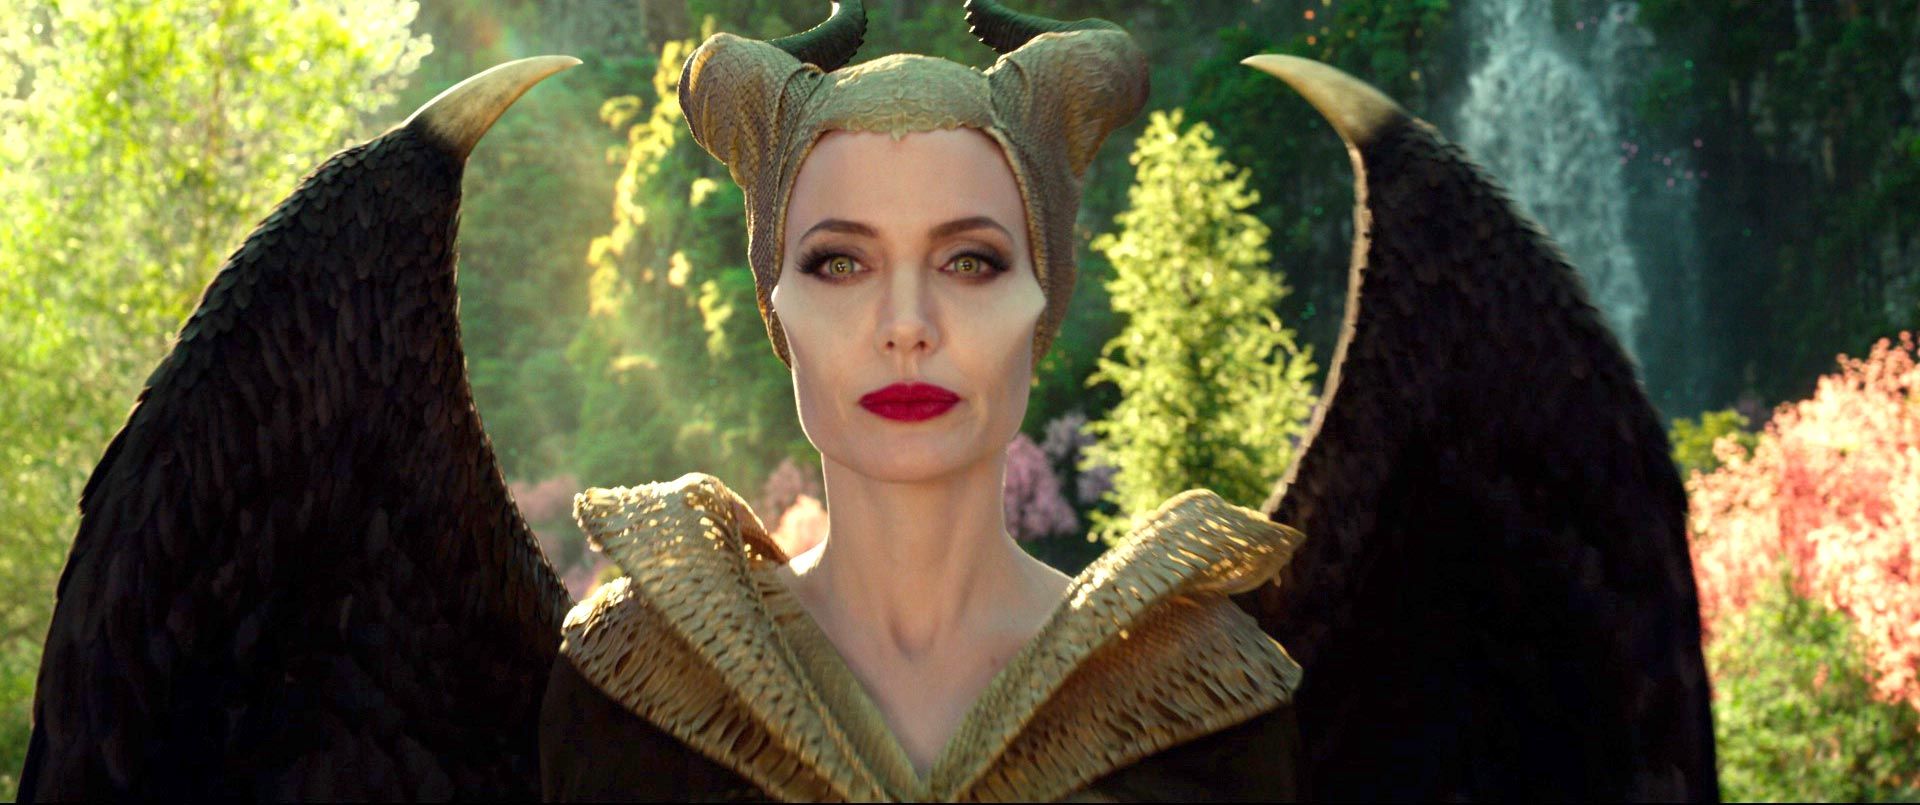 Is 'Maleficent: Mistress of Evil' Worth Watching? Is It Good?